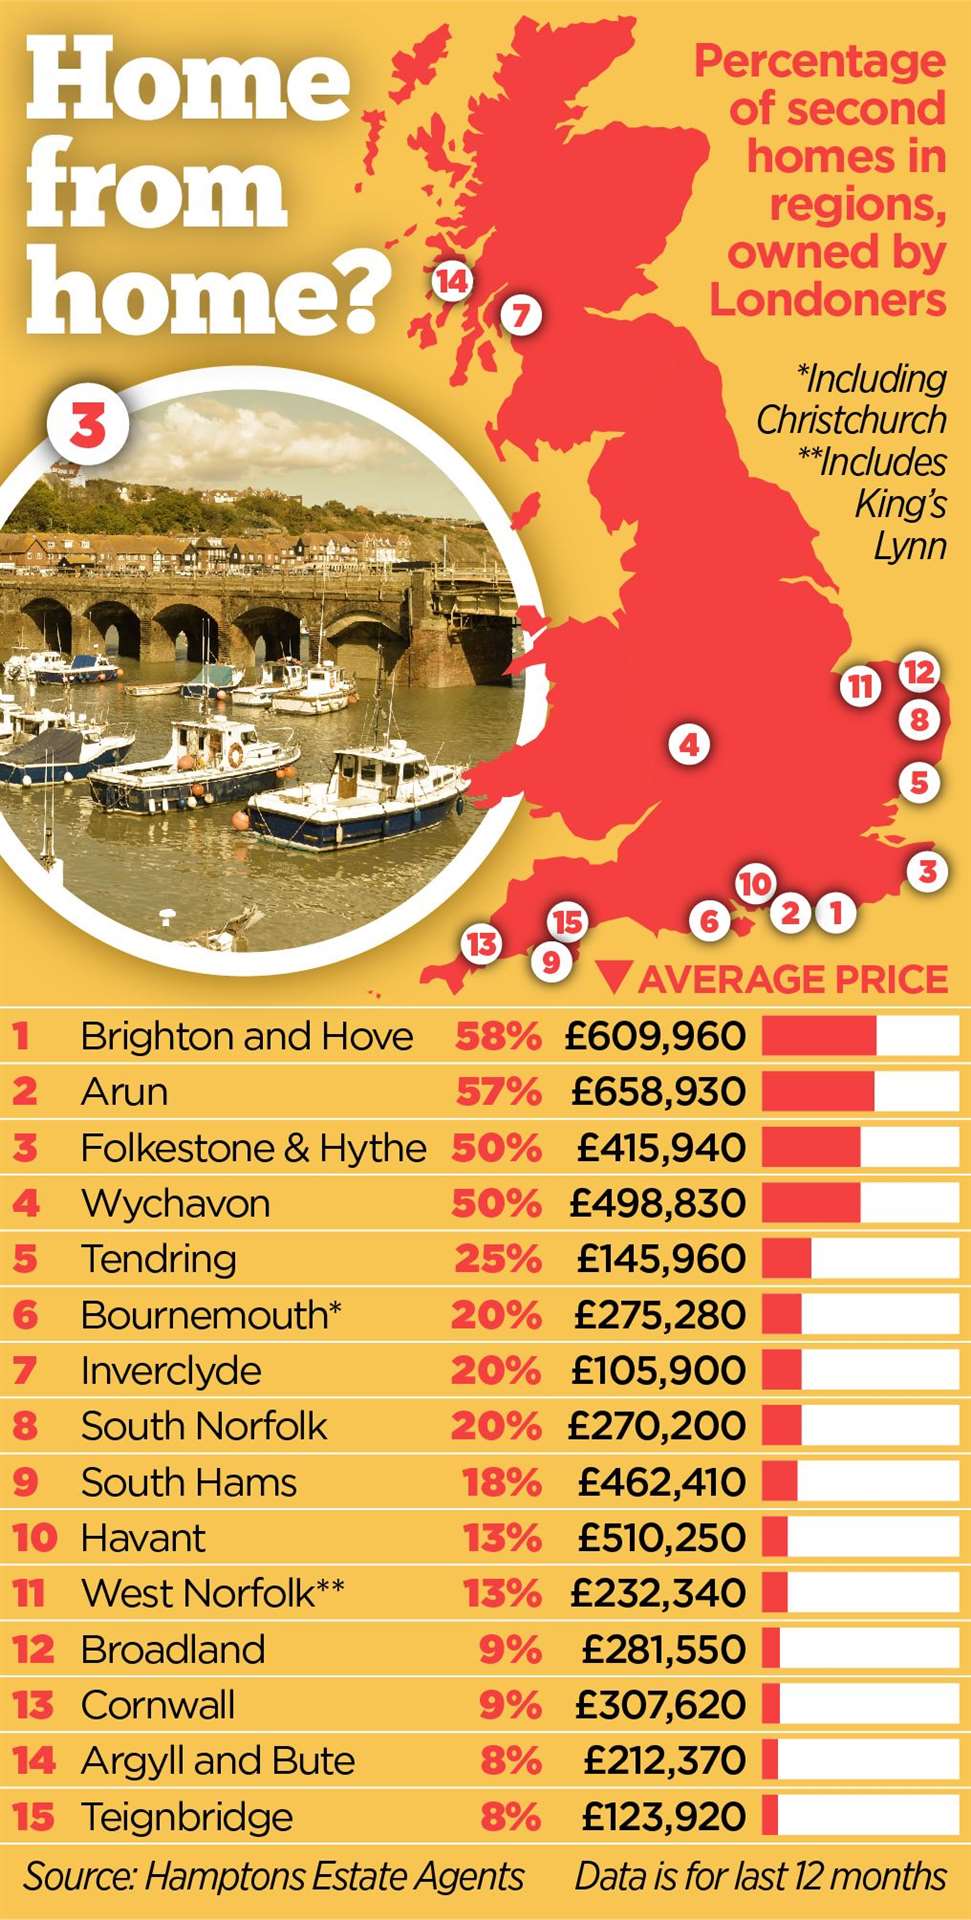 Folkestone and Hythe is the third most popular location in the UK for Londoners buying second homes